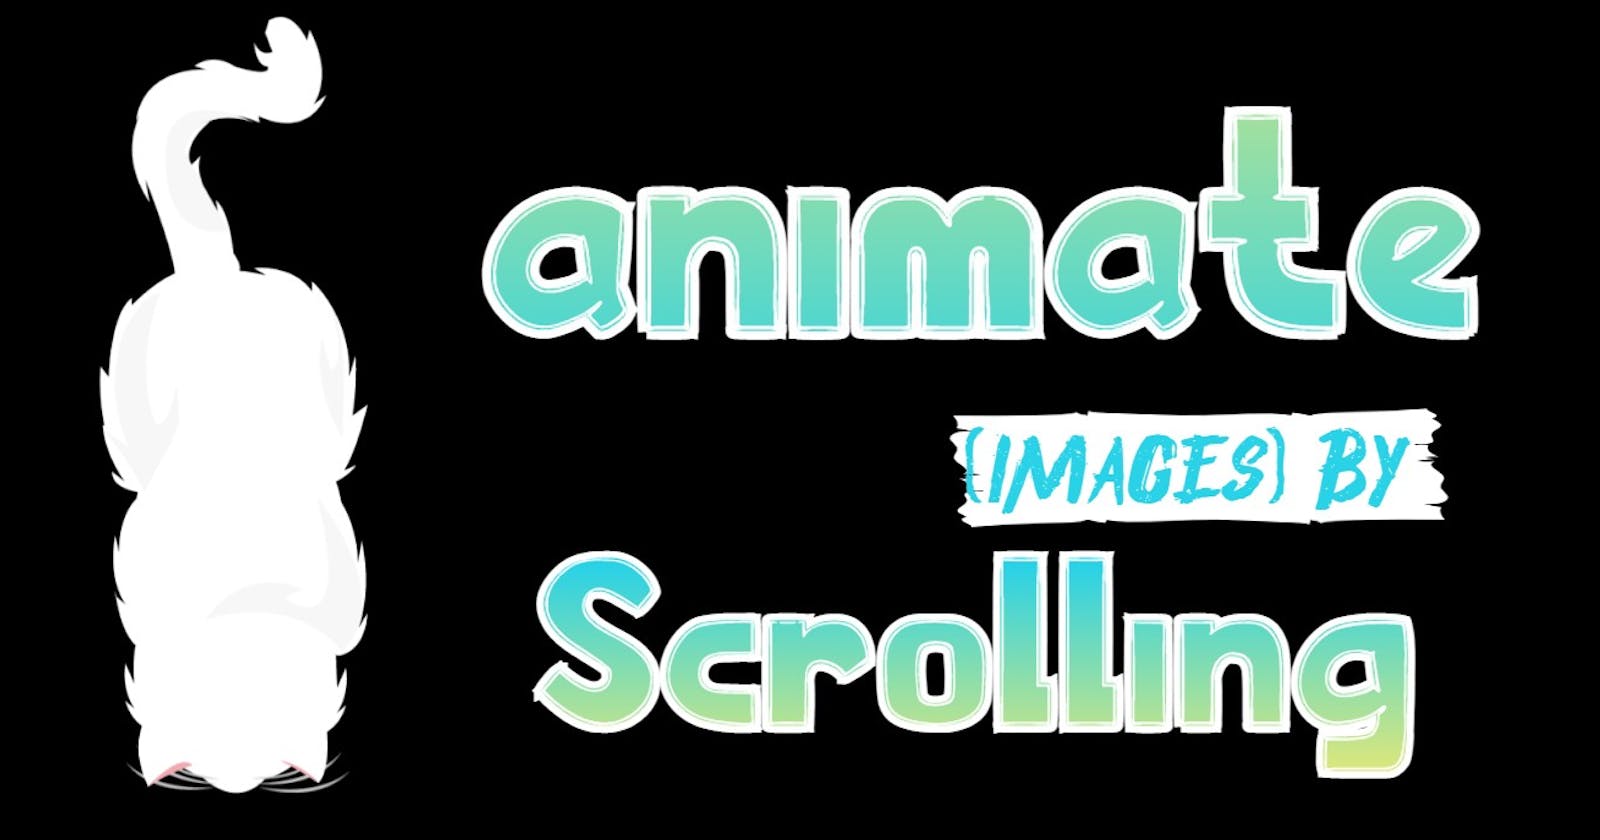 Image Animation when Scrolling